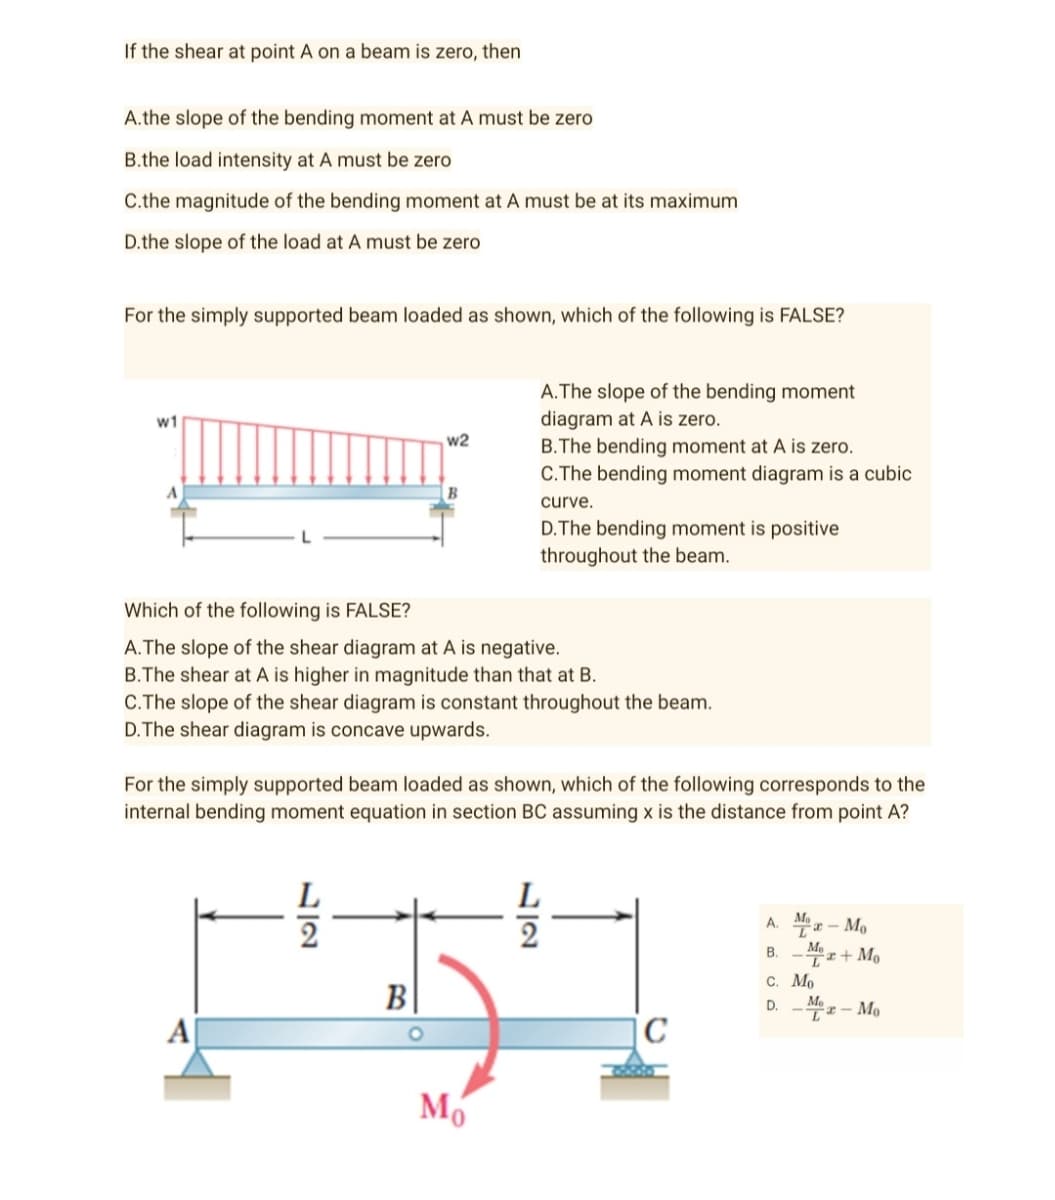 If the shear at point A on a beam is zero, then
A.the slope of the bending moment at A must be zero
B.the load intensity at A must be zero
C.the magnitude of the bending moment at A must be at its maximum
D.the slope of the load at A must be zero
For the simply supported beam loaded as shown, which of the following is FALSE?
A.The slope of the bending moment
diagram at A is zero.
w1
w2
B.The bending moment at A is zero.
C.The bending moment diagram is a cubic
curve.
D. The bending moment is positive
throughout the beam.
Which of the following is FALSE?
A. The slope of the shear diagram at A is negative.
B.The shear at A is higher in magnitude than that at B.
C.The slope of the shear diagram is constant throughout the beam.
D.The shear diagram is concave upwards.
For the simply supported beam loaded as shown, which of the following corresponds to the
internal bending moment equation in section BC assuming x is the distance from point A?
L
L
A.
Ma-Mo
2
2
B. z+Mo
C. Mo
B
D.
Me
T-Mo
C
Mo